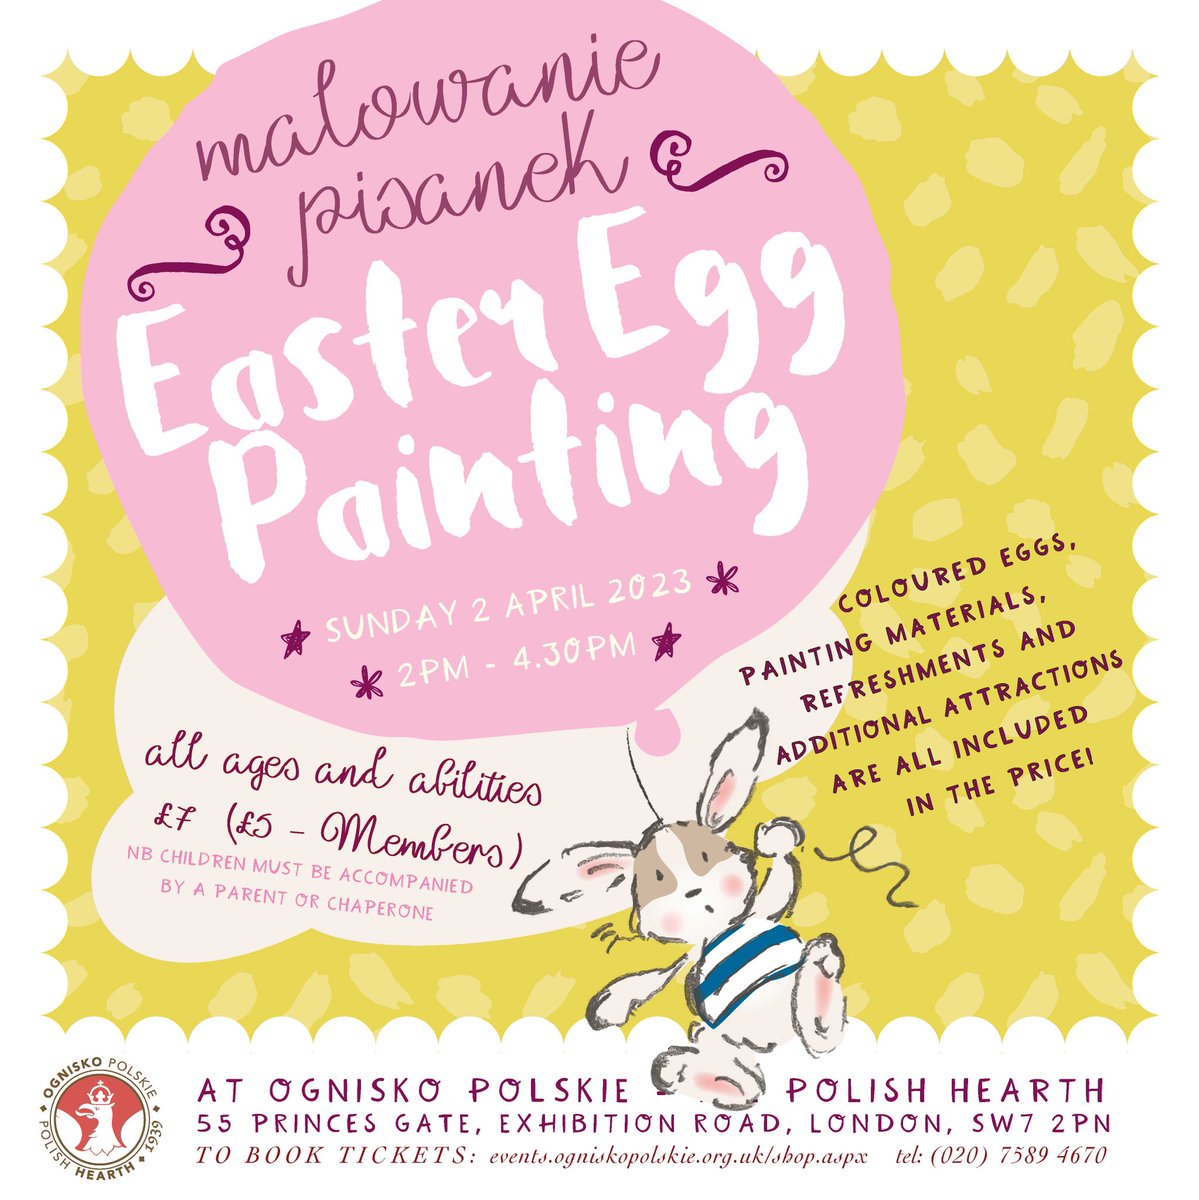 Getting ready for the Easter Egg painting on Sunday!
🥚🥚🥚🐣🐥
Pre-booked places only:
events.ogniskopolskie.org.uk/home

#craft #craftevent #pisanki #LondonEvent #easter #eastereggs #paintingeastereggs